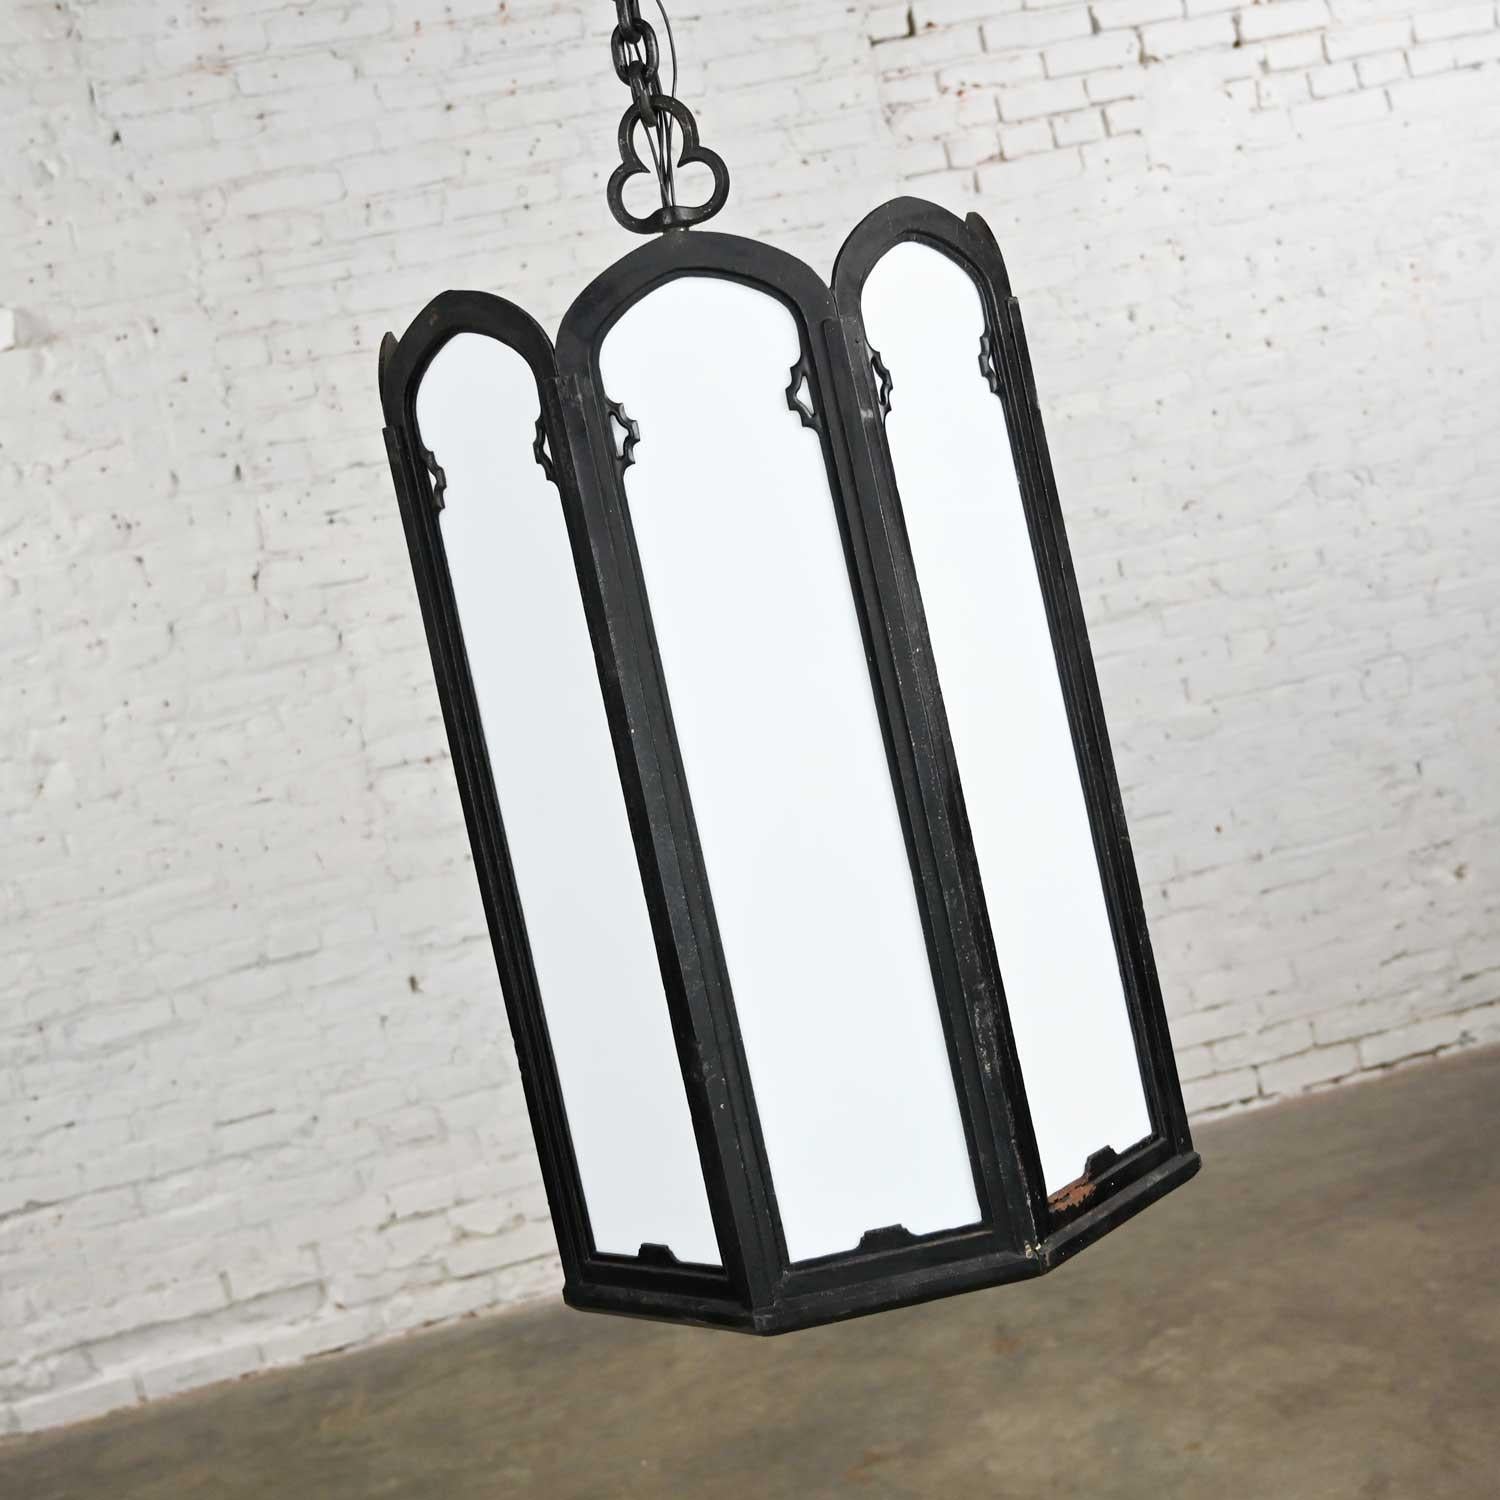 Wonderful large vintage gothic or Art Deco black painted wrought iron & white milk glass light fixtures. 3 total selling separately. Beautiful condition, keeping in mind that these are vintage and not new so will have signs of use and wear. The